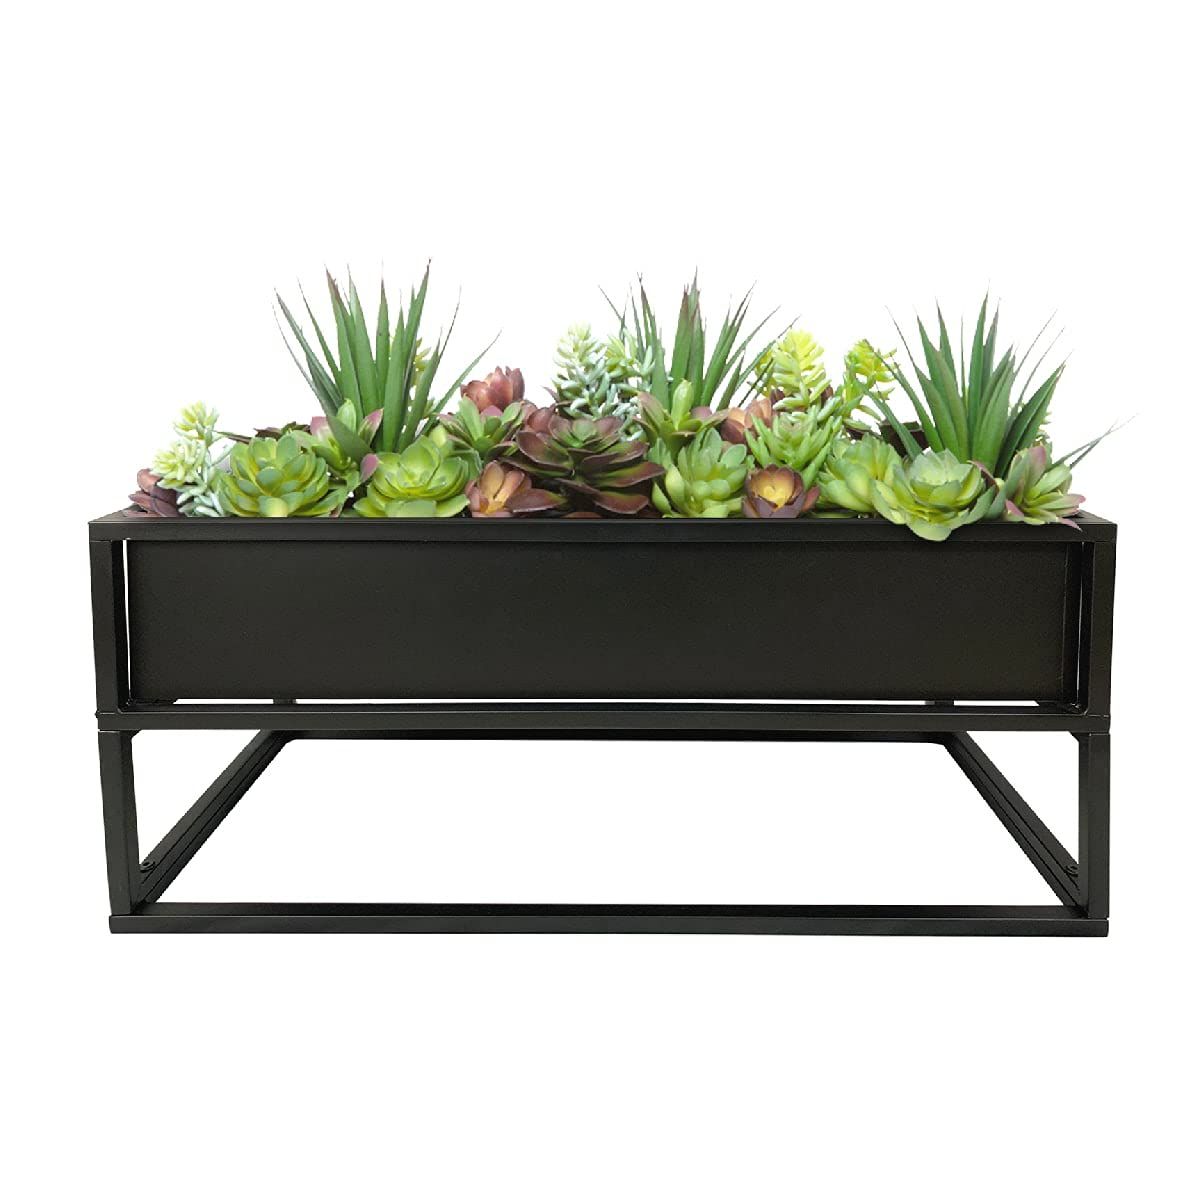 Plant Stands With Flower Box Pertaining To Best And Newest Amazon : Cocoyard Modern Elevated Metal Planter Box – Made Durable And  Resilient Metal – Indoor Outdoor Plant Stand – Ideal For Garden Decor,  Backyard And Patio Decor : Patio, Lawn & Garden (View 3 of 15)